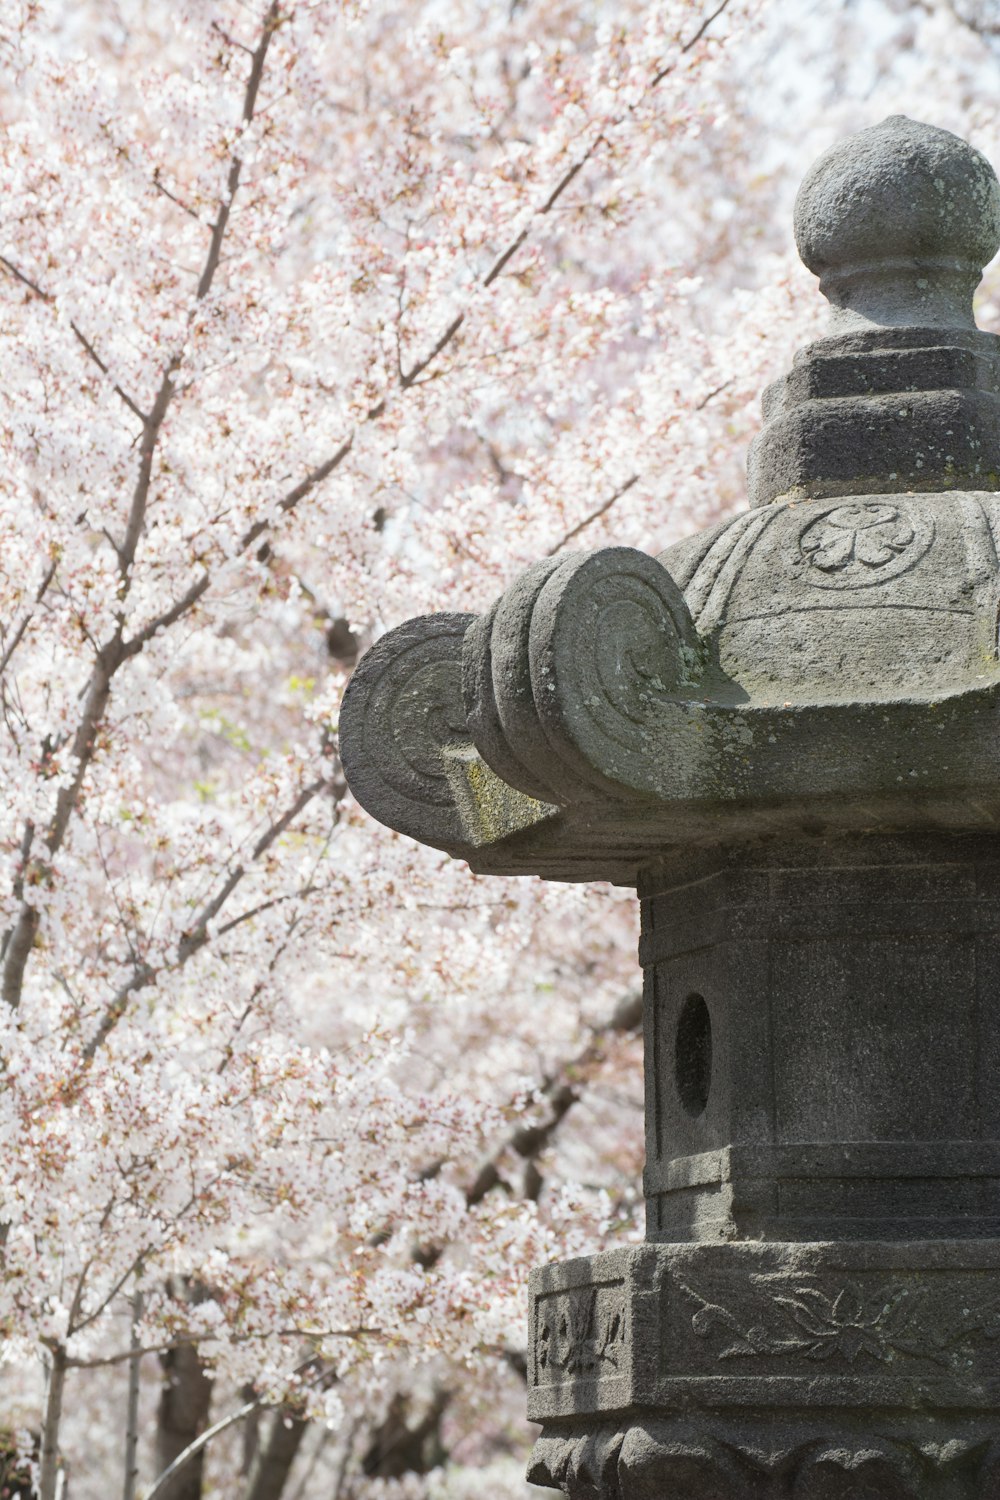 a stone lantern in front of a blooming tree